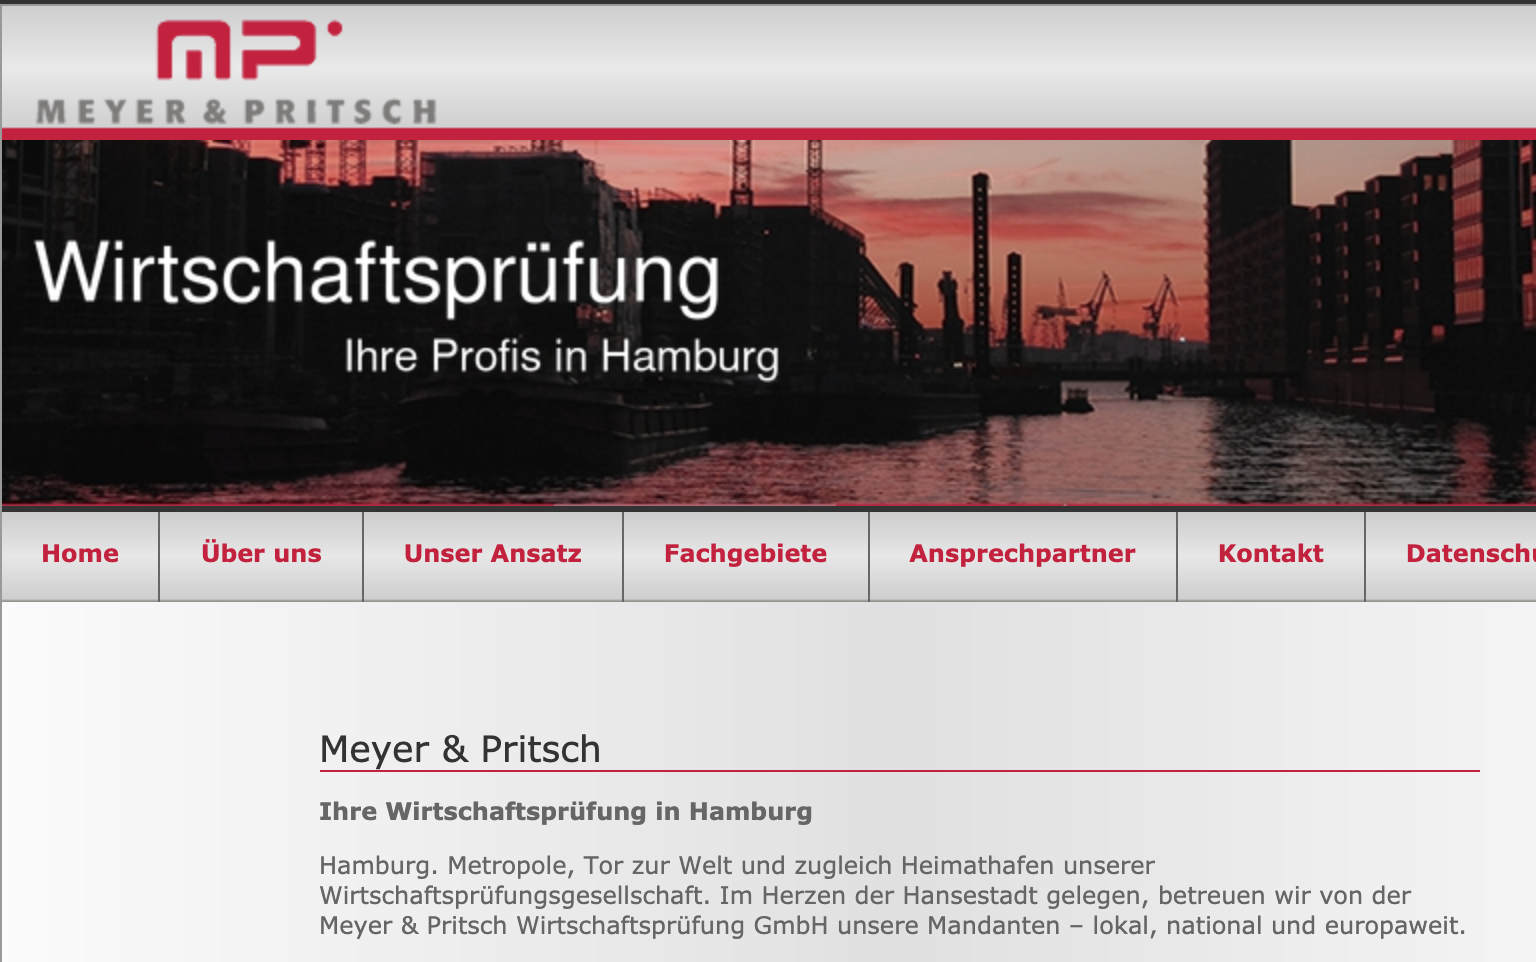 meyerpritsch home page cut out